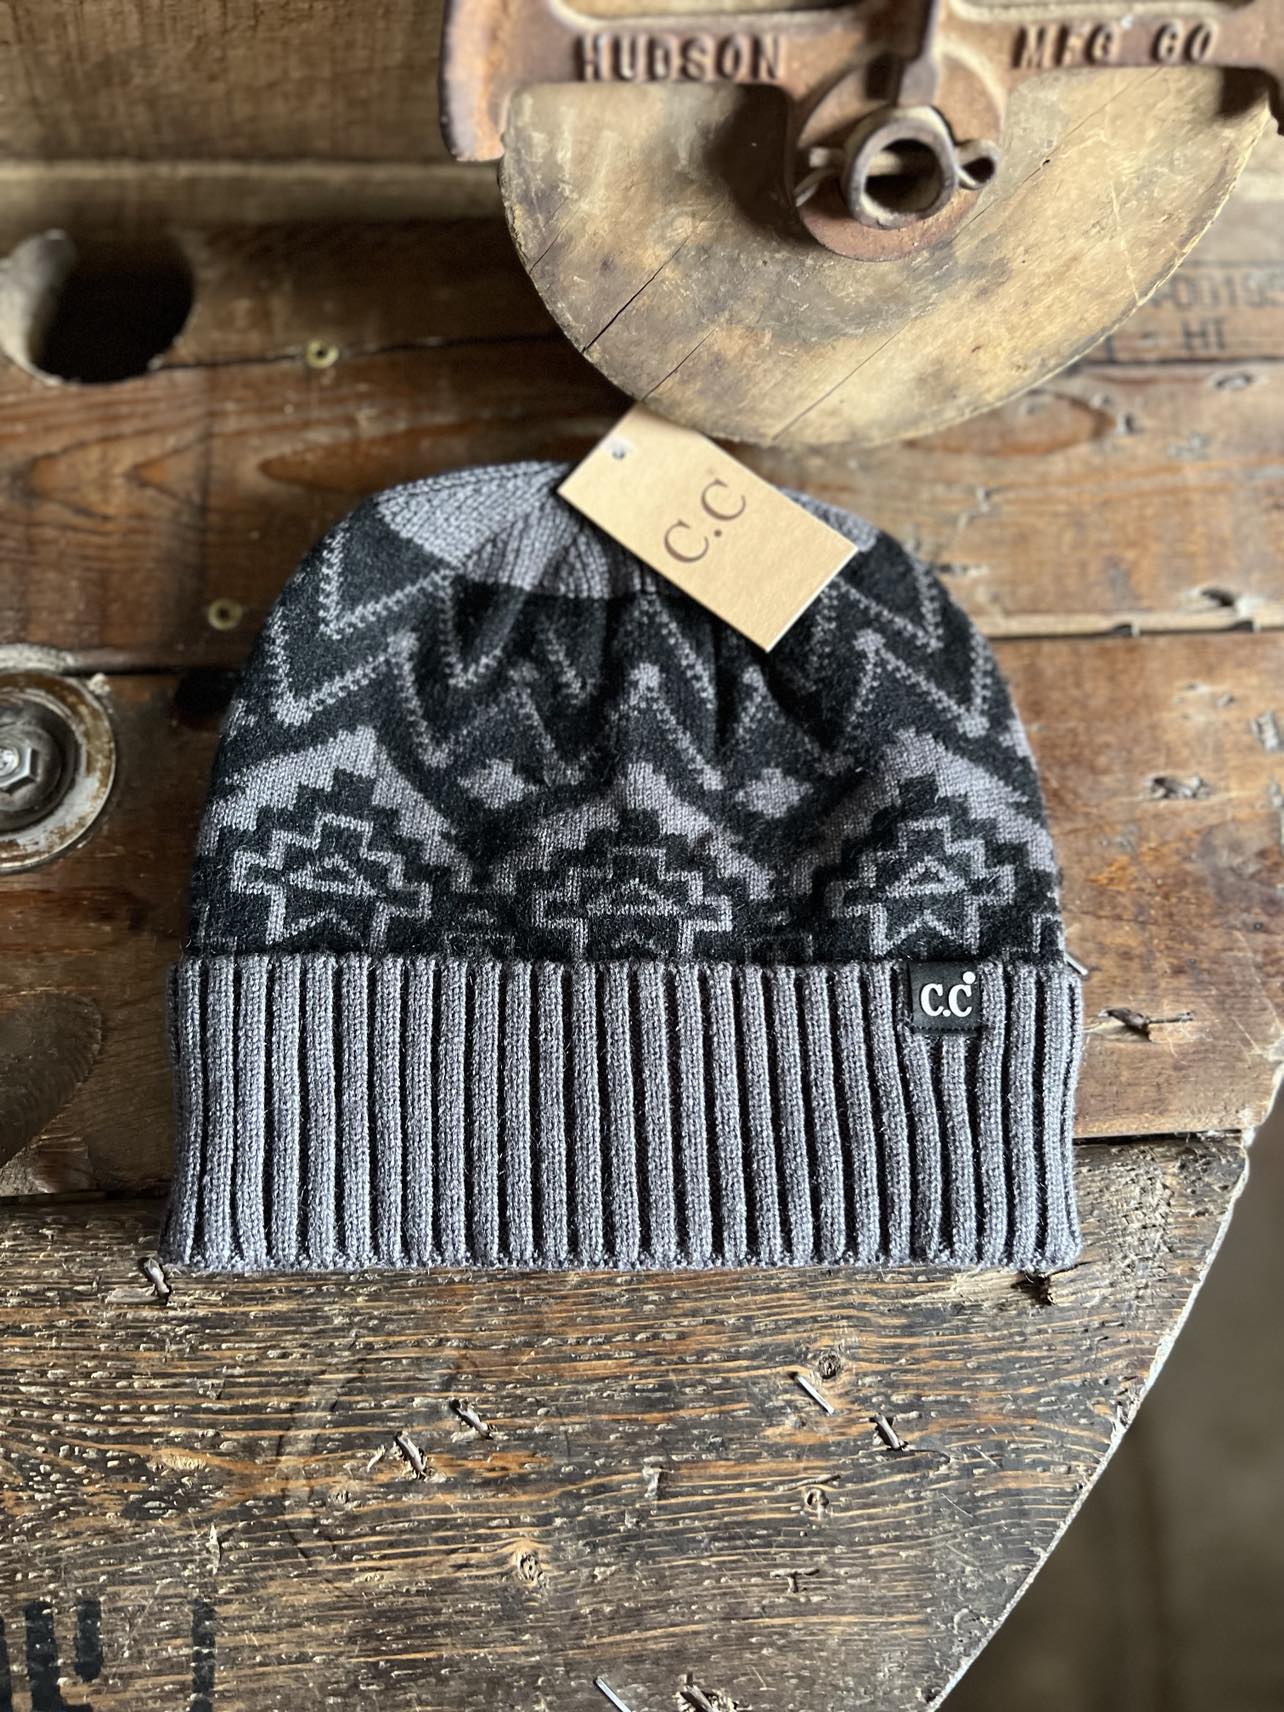 C.C Cuffed Southwestern Print Beanie-Beanie/Gloves-C.C Beanies-Lucky J Boots & More, Women's, Men's, & Kids Western Store Located in Carthage, MO